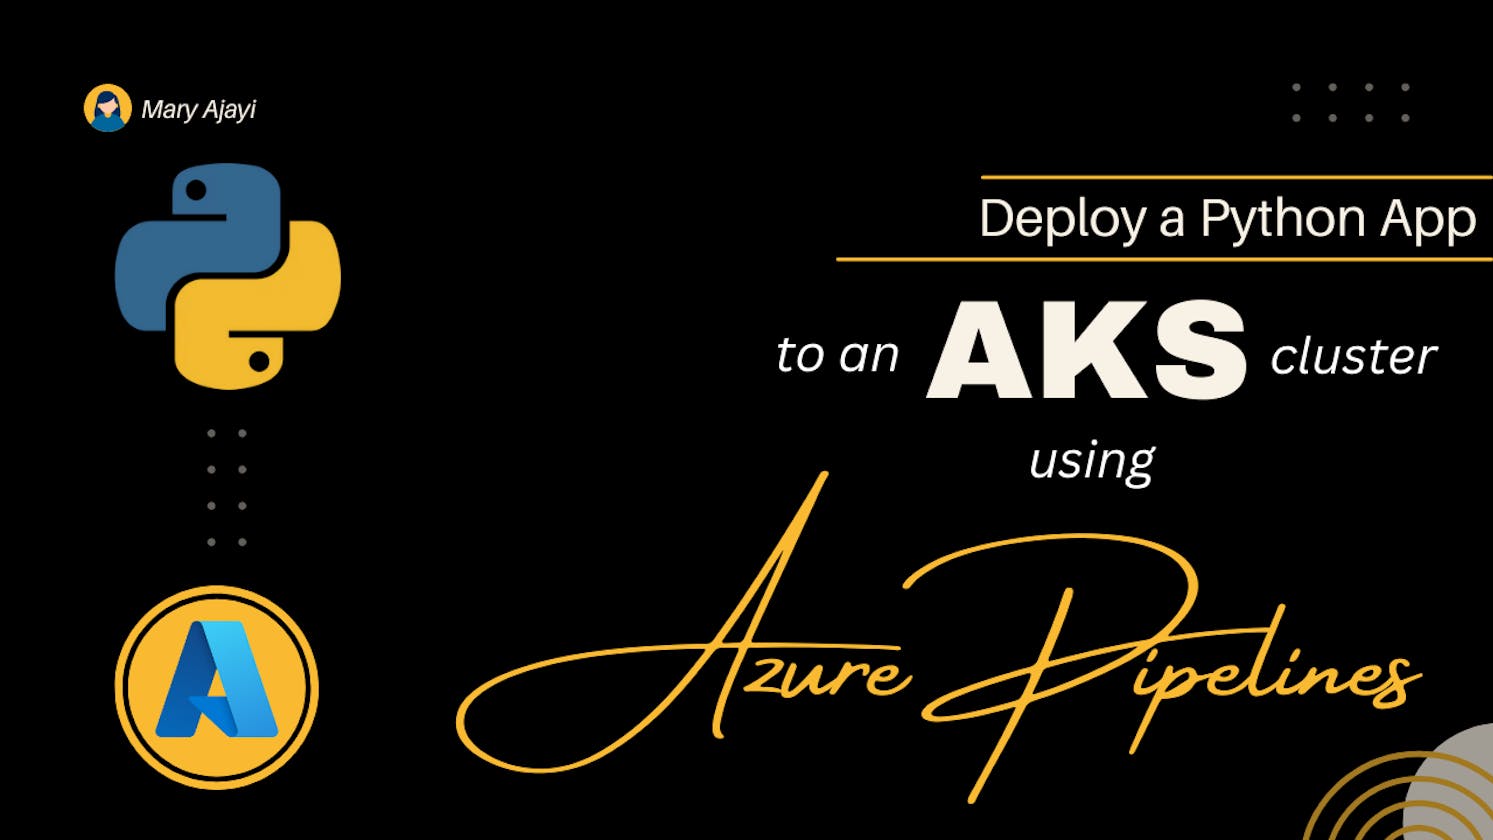 Deploying a Python App to an AKS Cluster Using Azure Pipelines